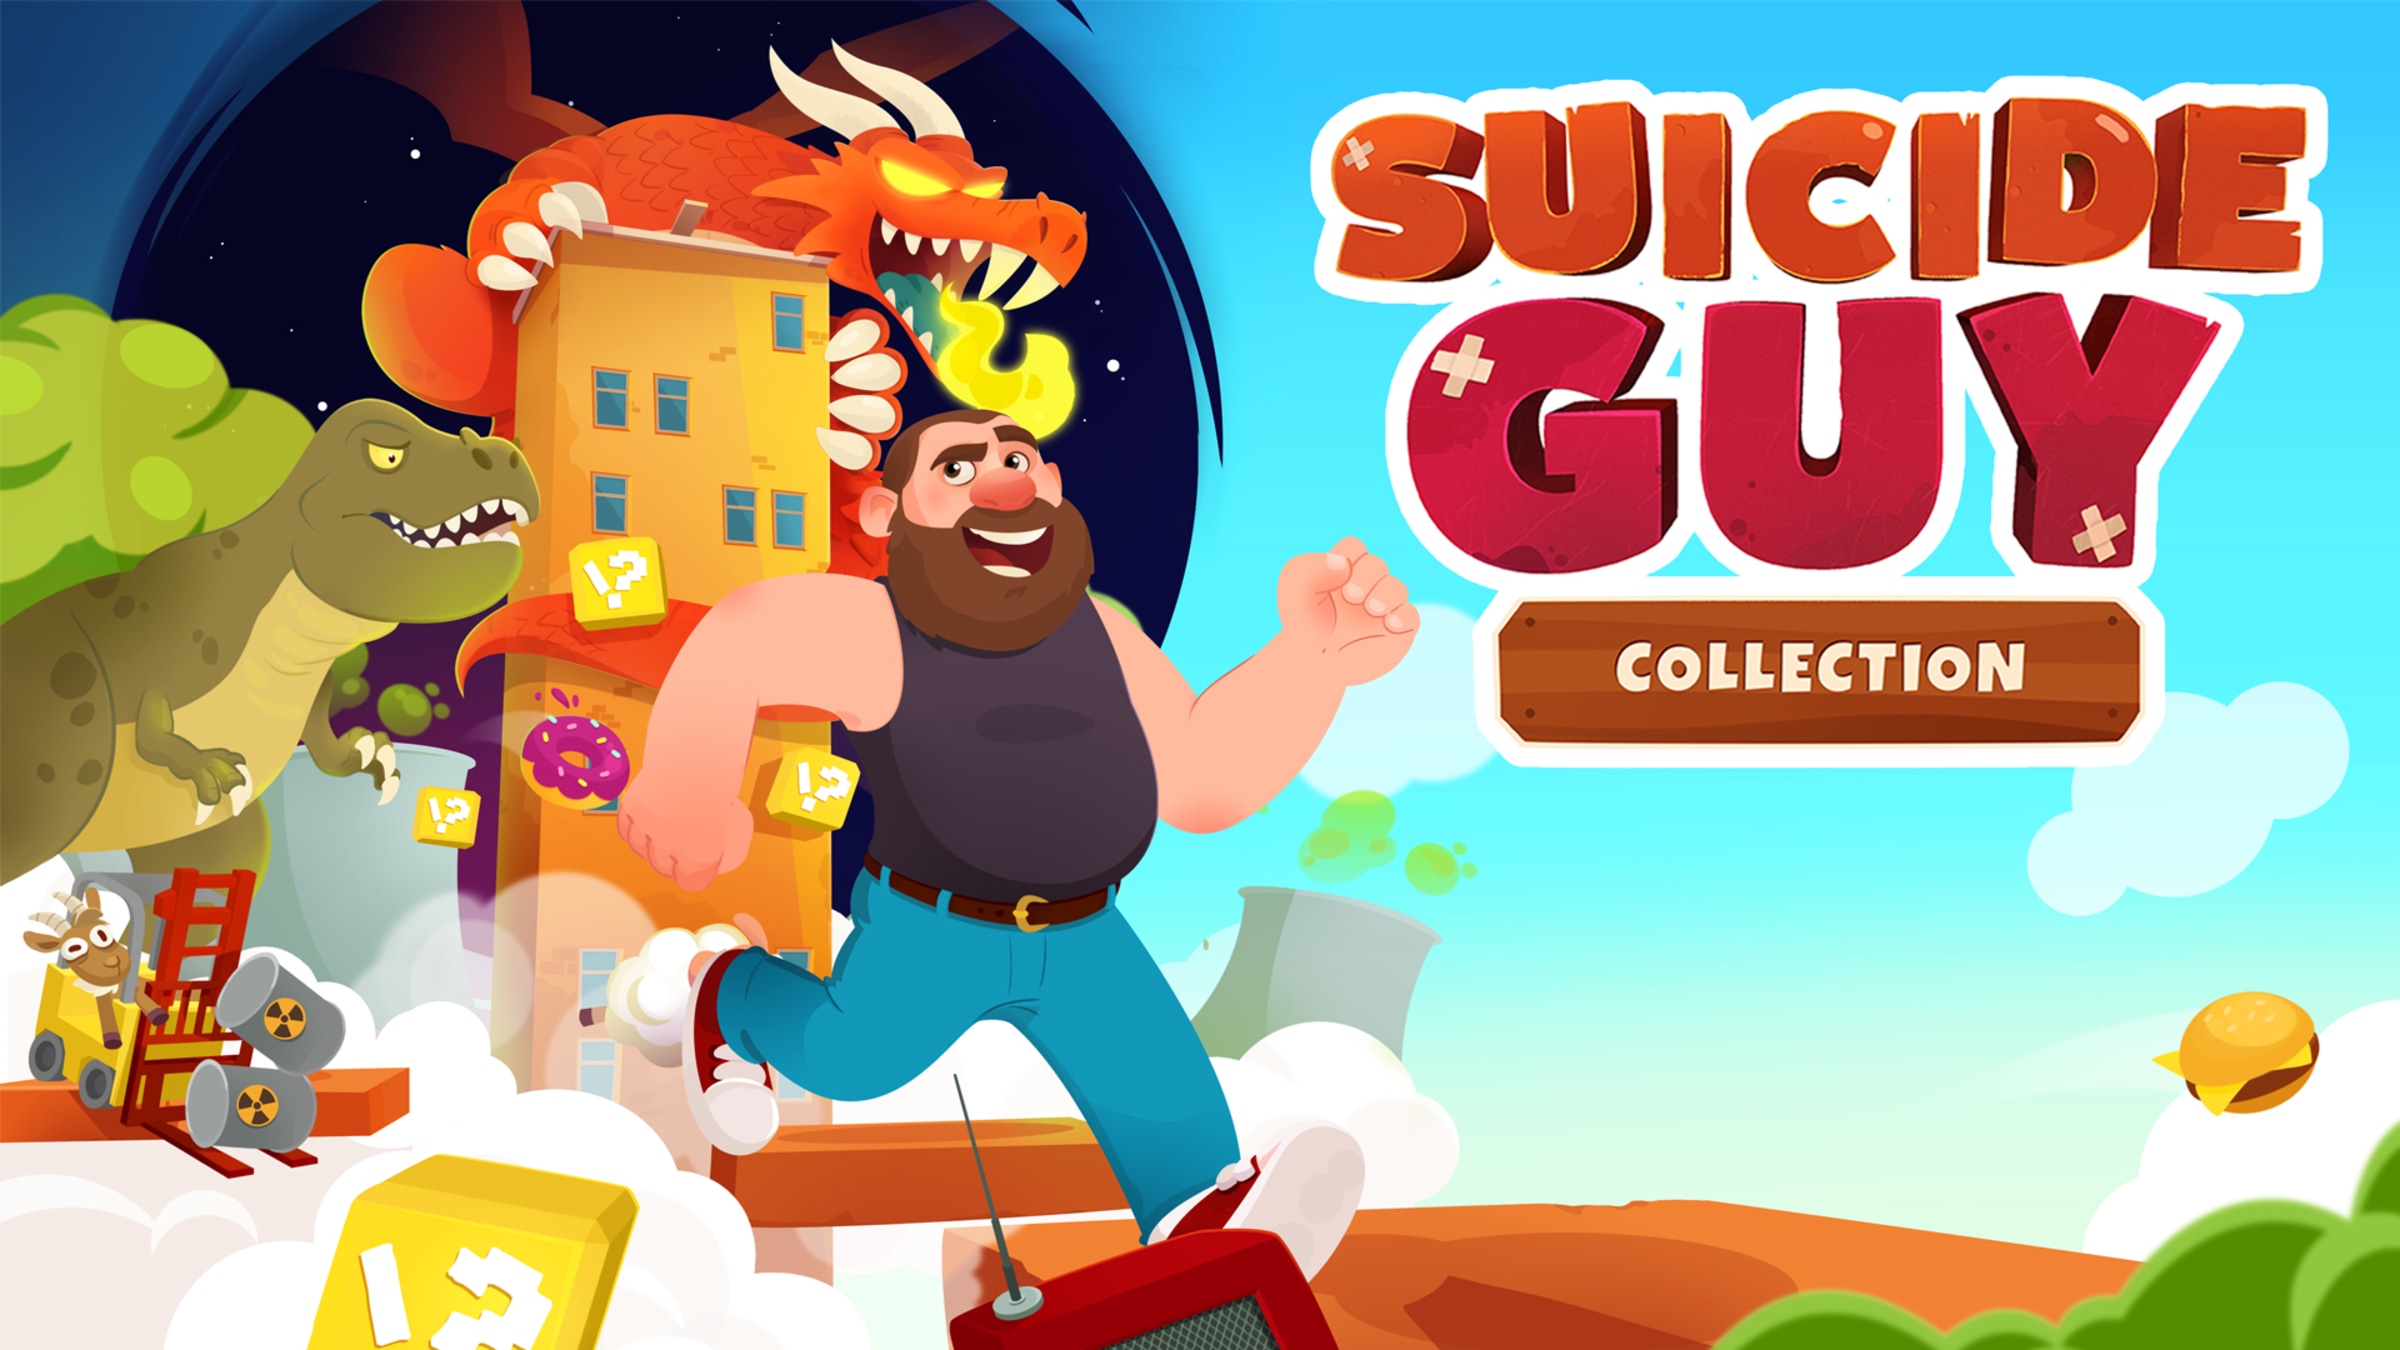 Suicide guy steam фото 65